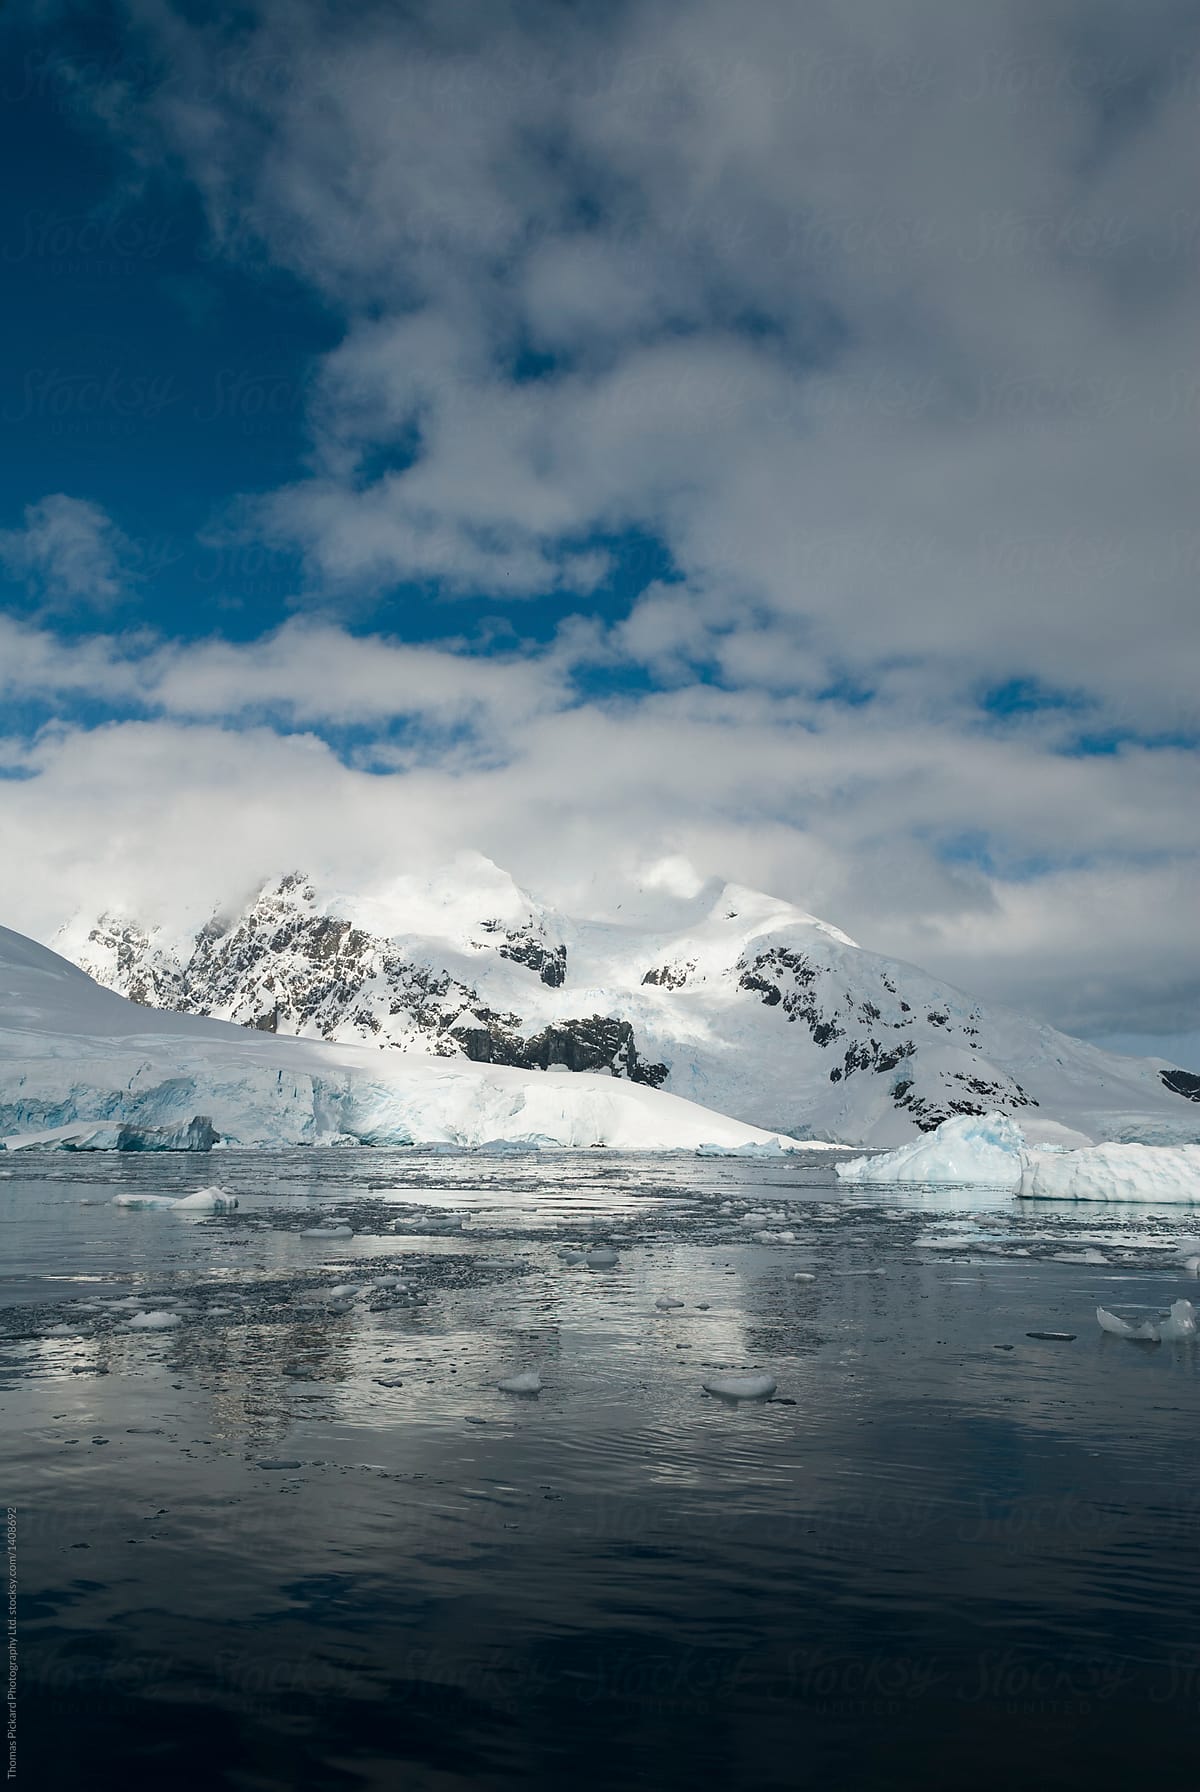 Ocean and mountains, Paradise Harbour, Antarctica.